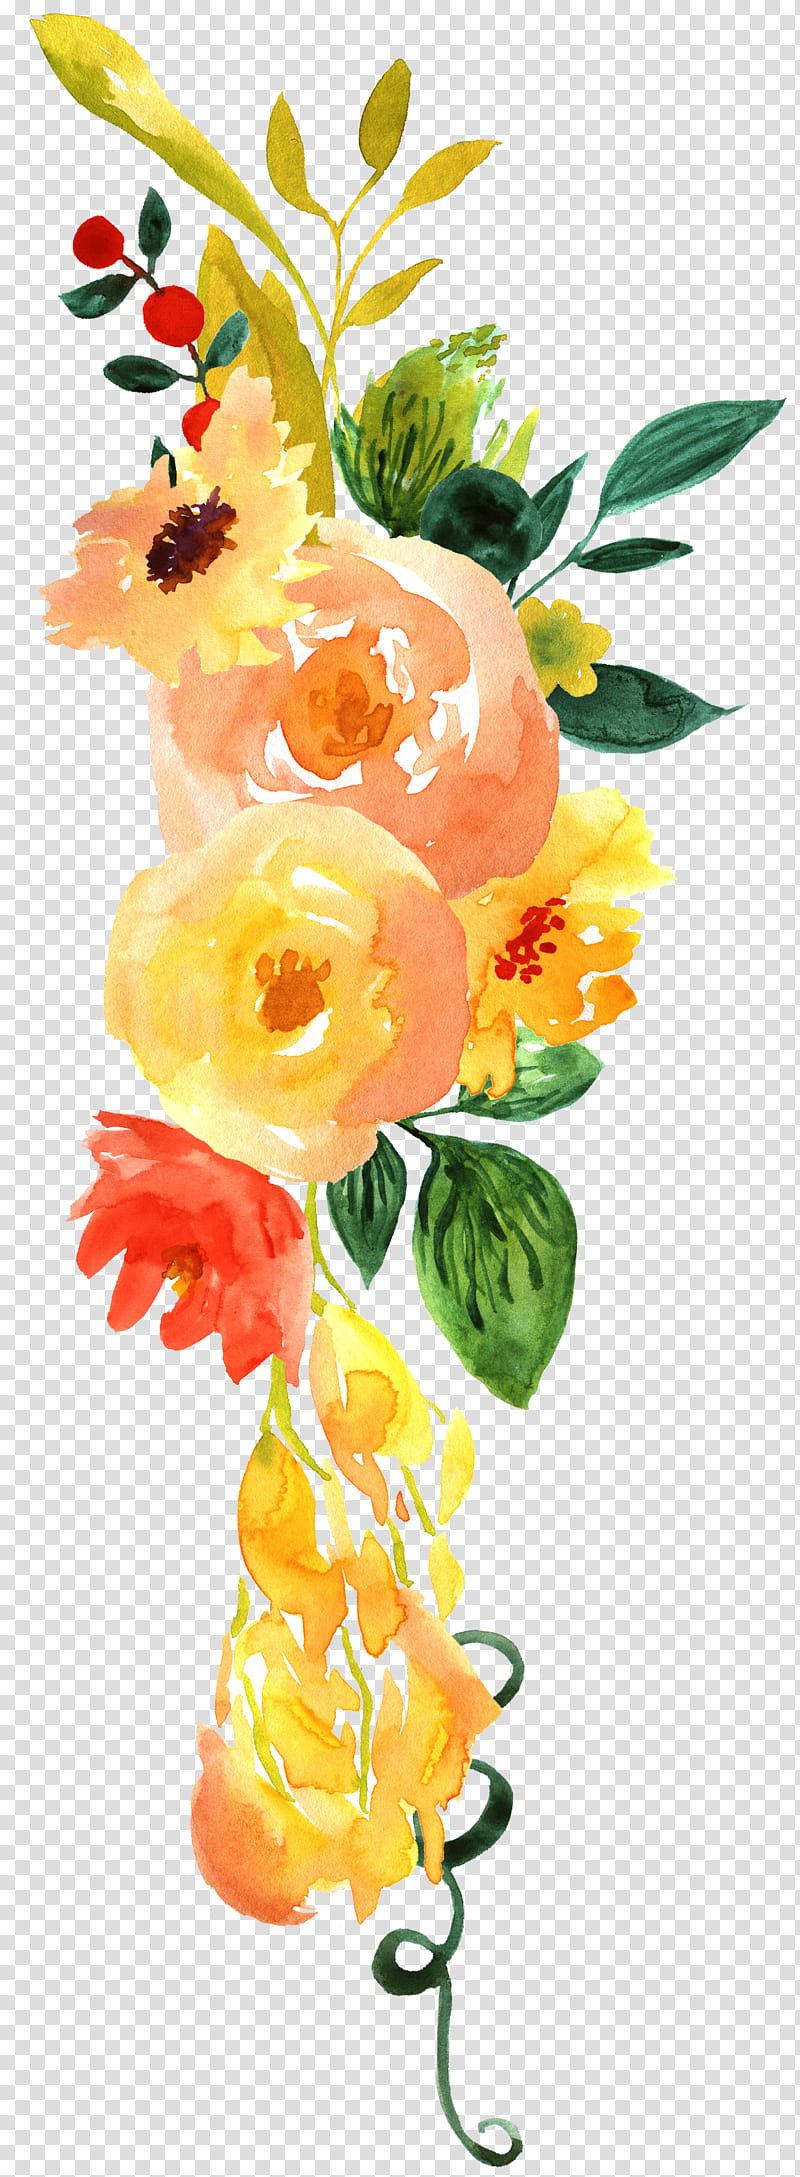 Watercolor Flower, Watercolor Painting, Canvas, Stretcher Bar, Paint Brushes, Motif, Yellow, Cut Flowers transparent background PNG clipart